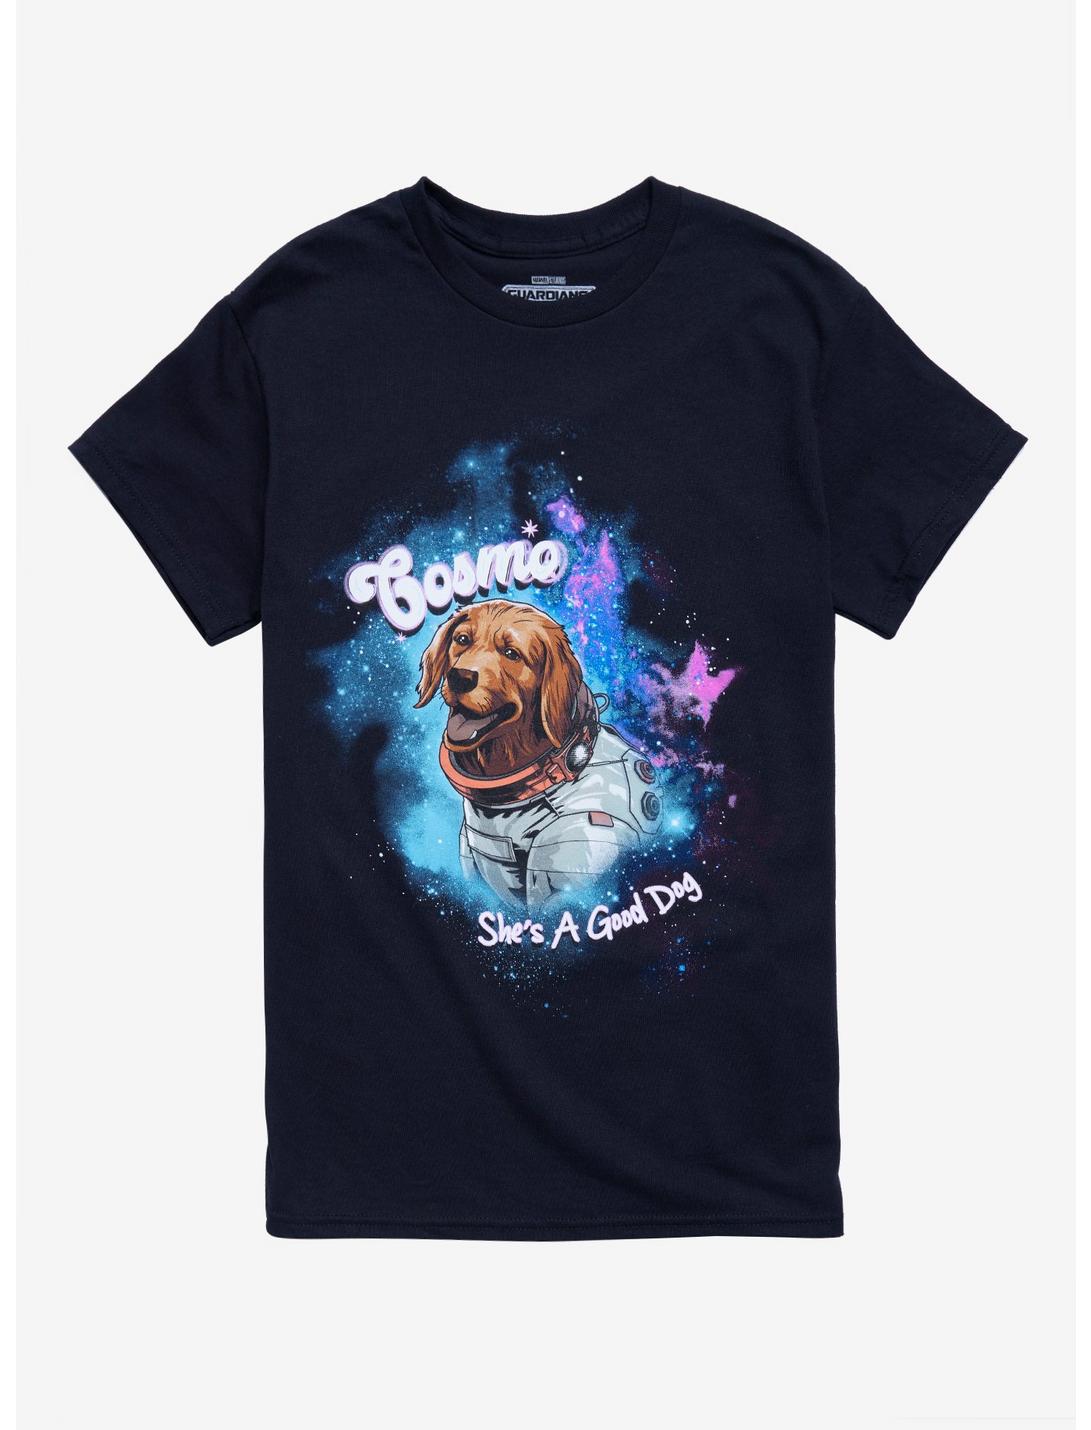 Marvel Guardians Of The Galaxy: Volume 3 Cosmo Boyfriend Fit Girls T-Shirt, MULTI, hi-res